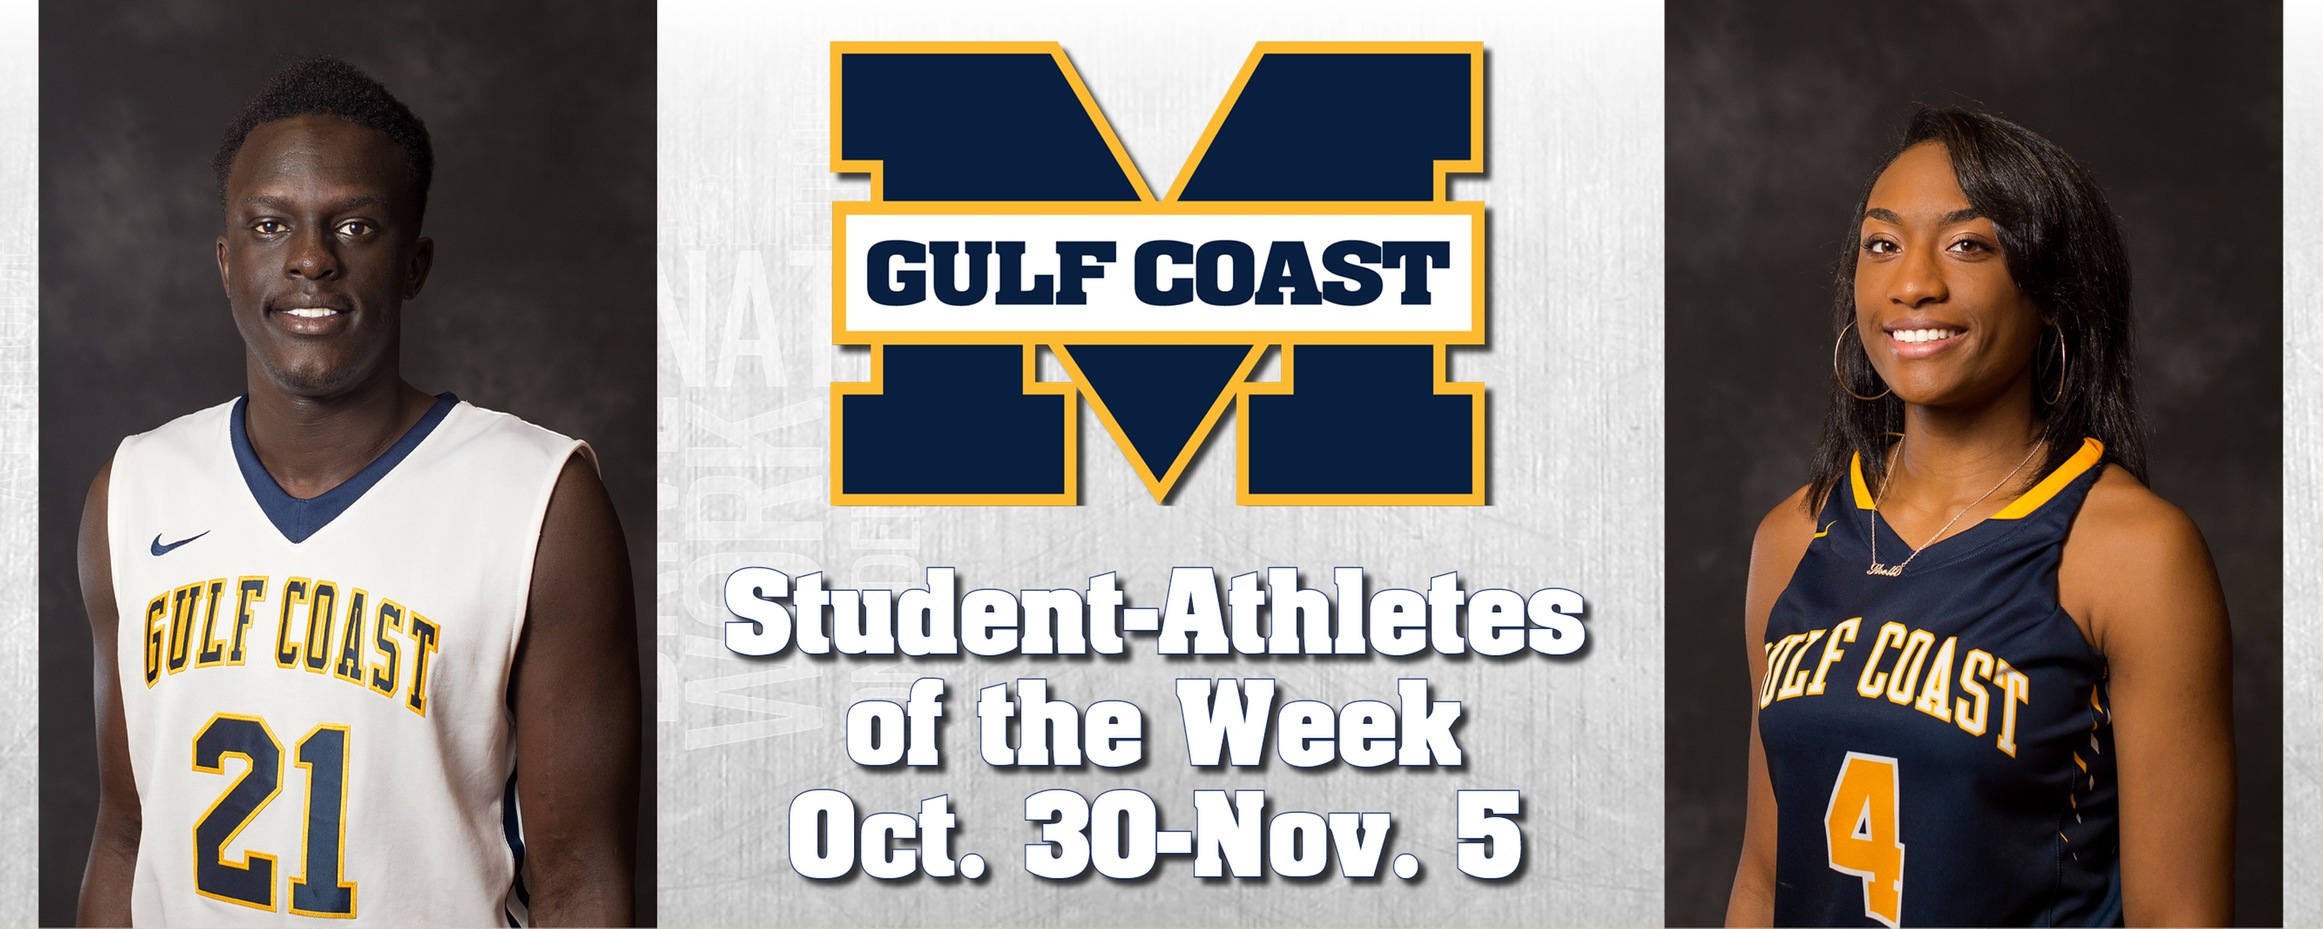 Chan, Thigpen named MGCCC Student-Athletes of the Week